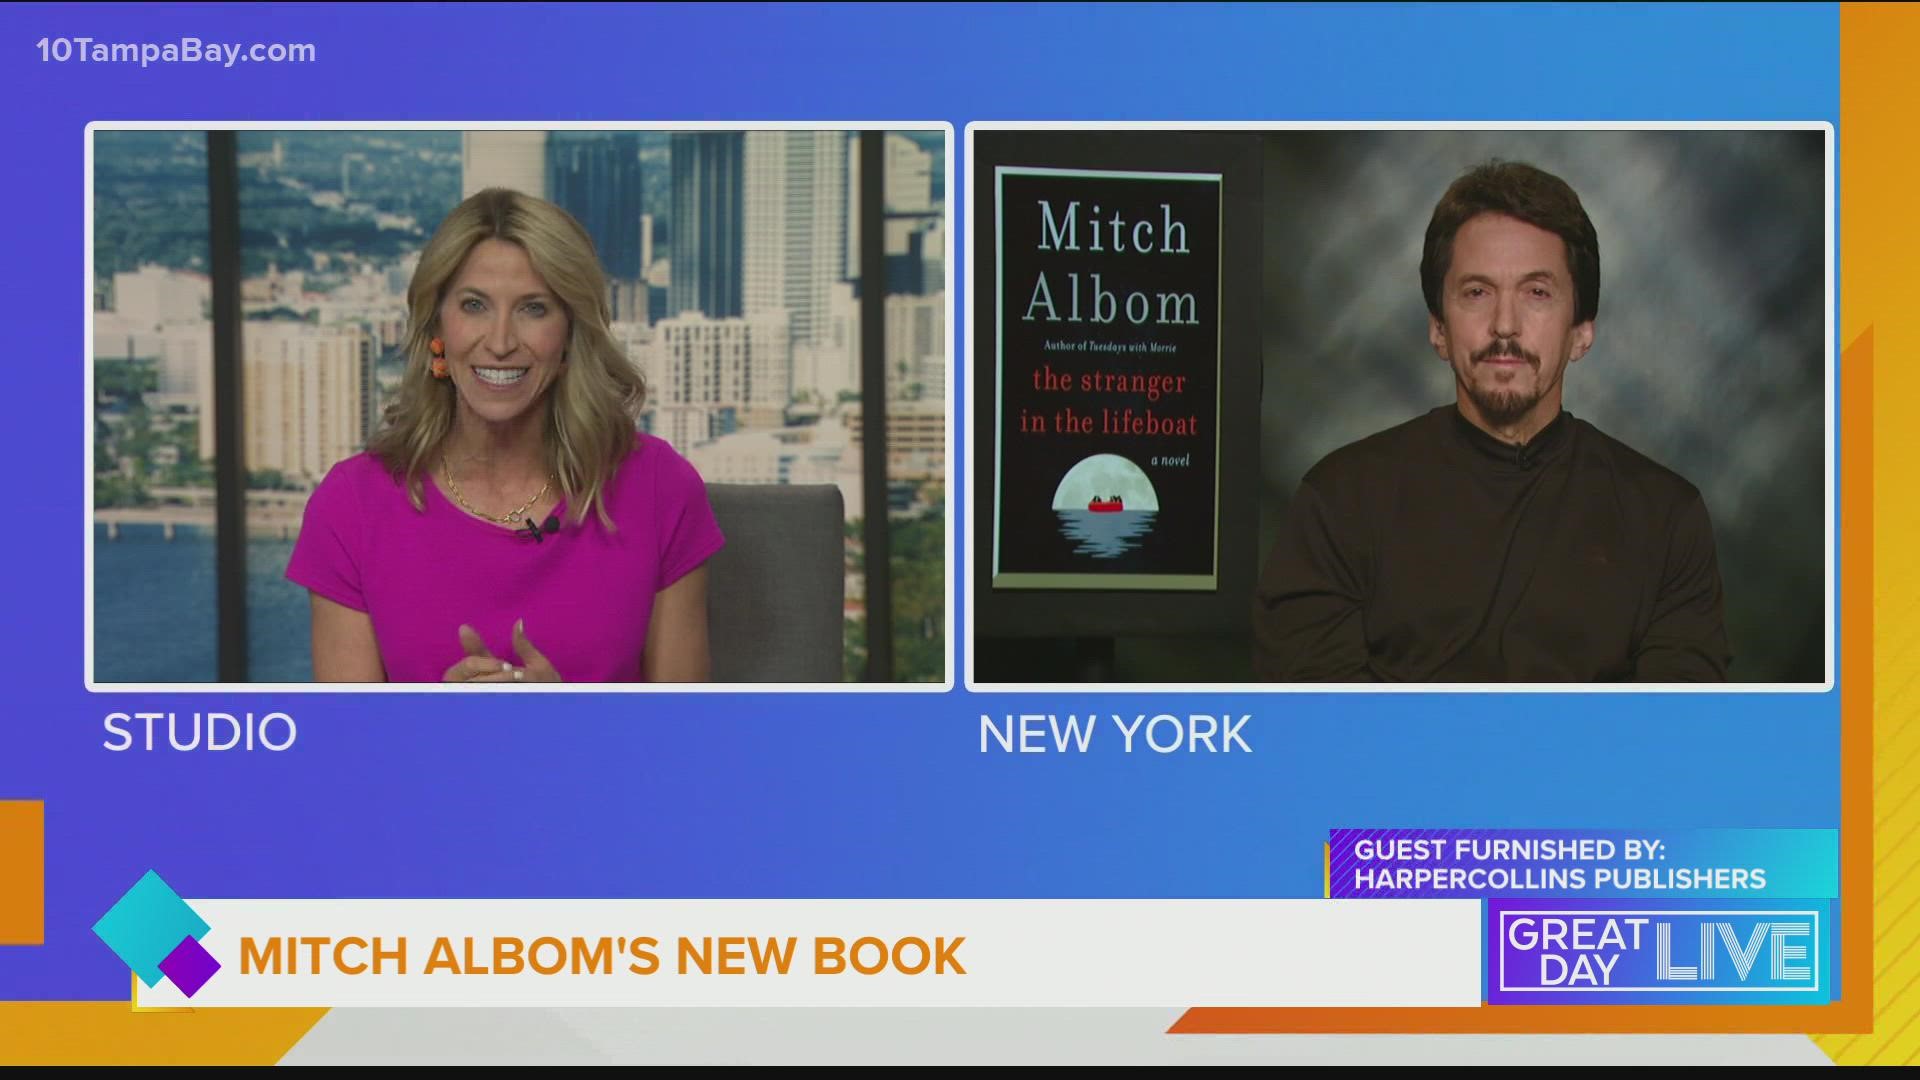 Bestselling Author Mitch Albom Releases New Book